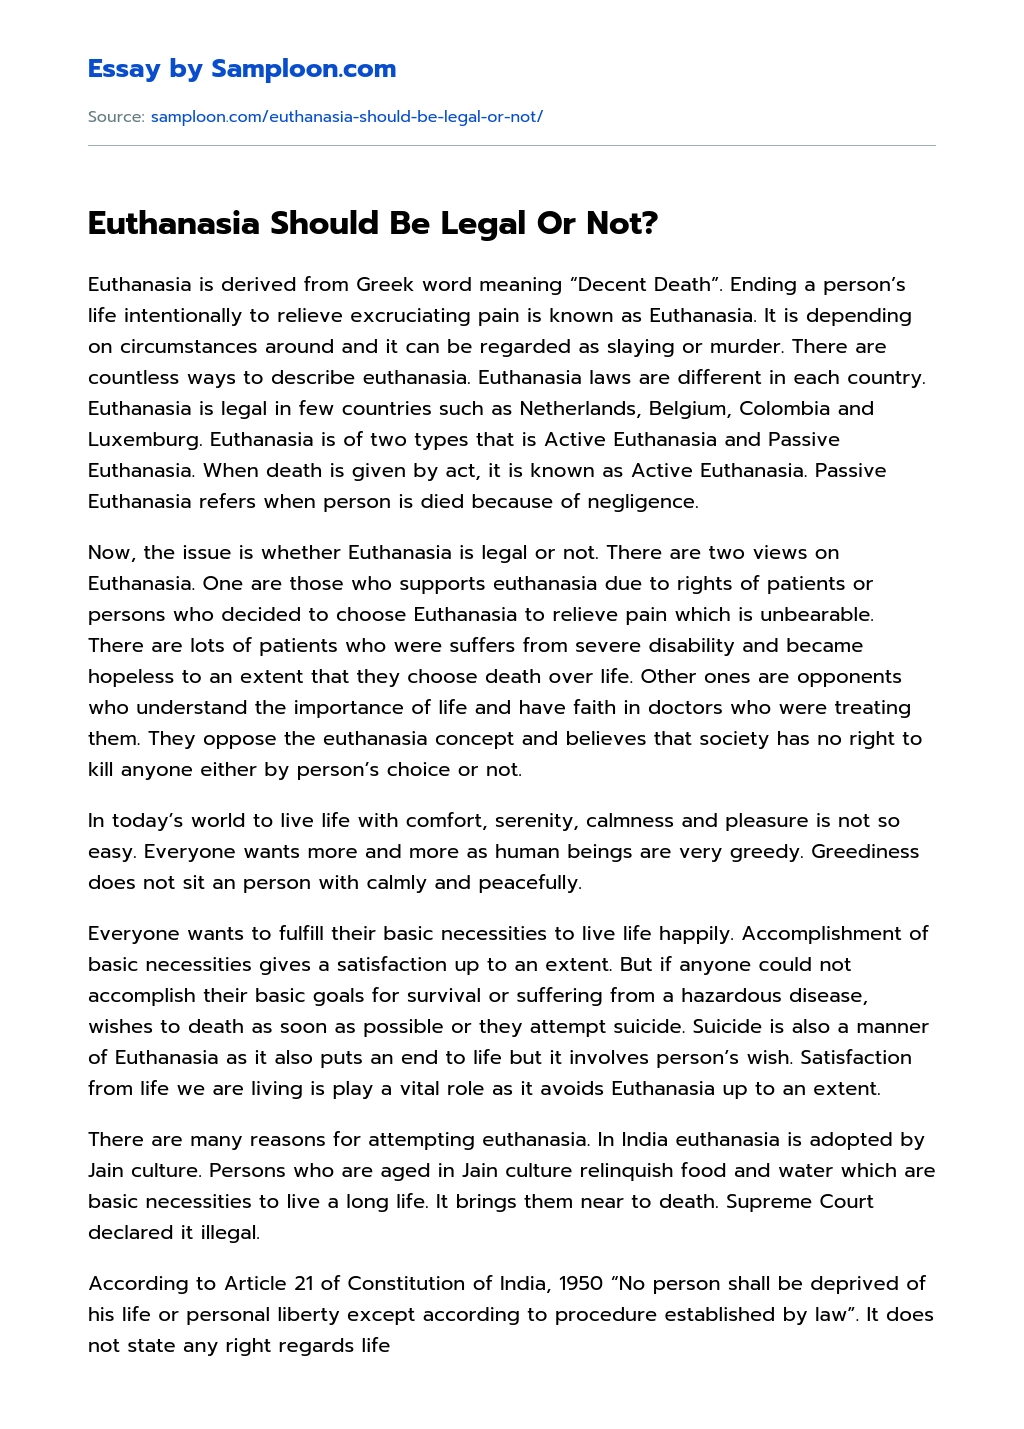 euthanasia should be legal essay conclusion